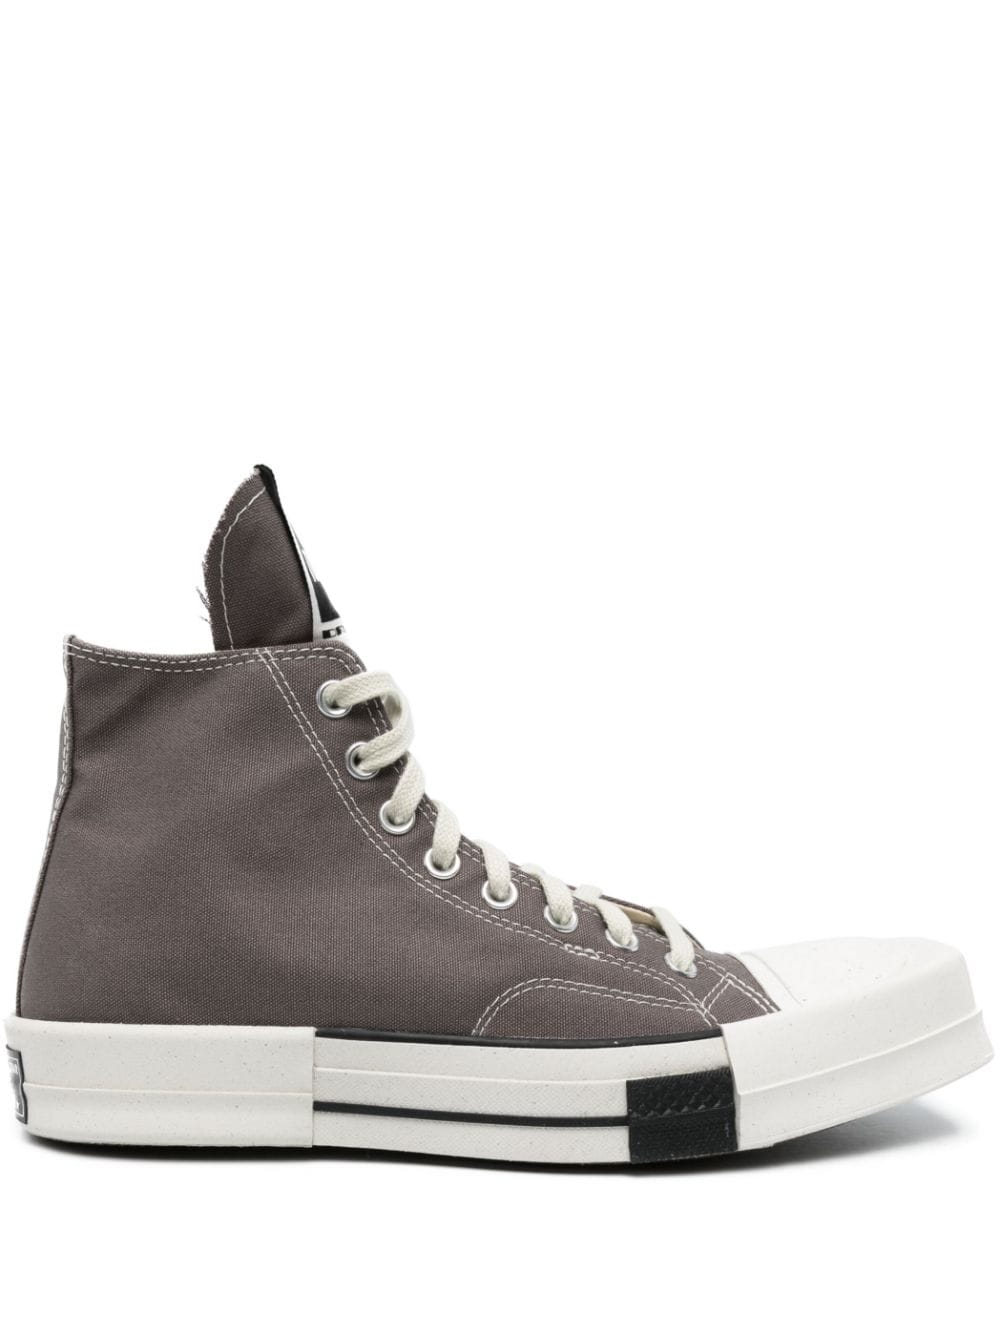 RICK OWENS DRKSHDW X CONVERSE Turbodrk Laceless Woven High-Top Sneakers